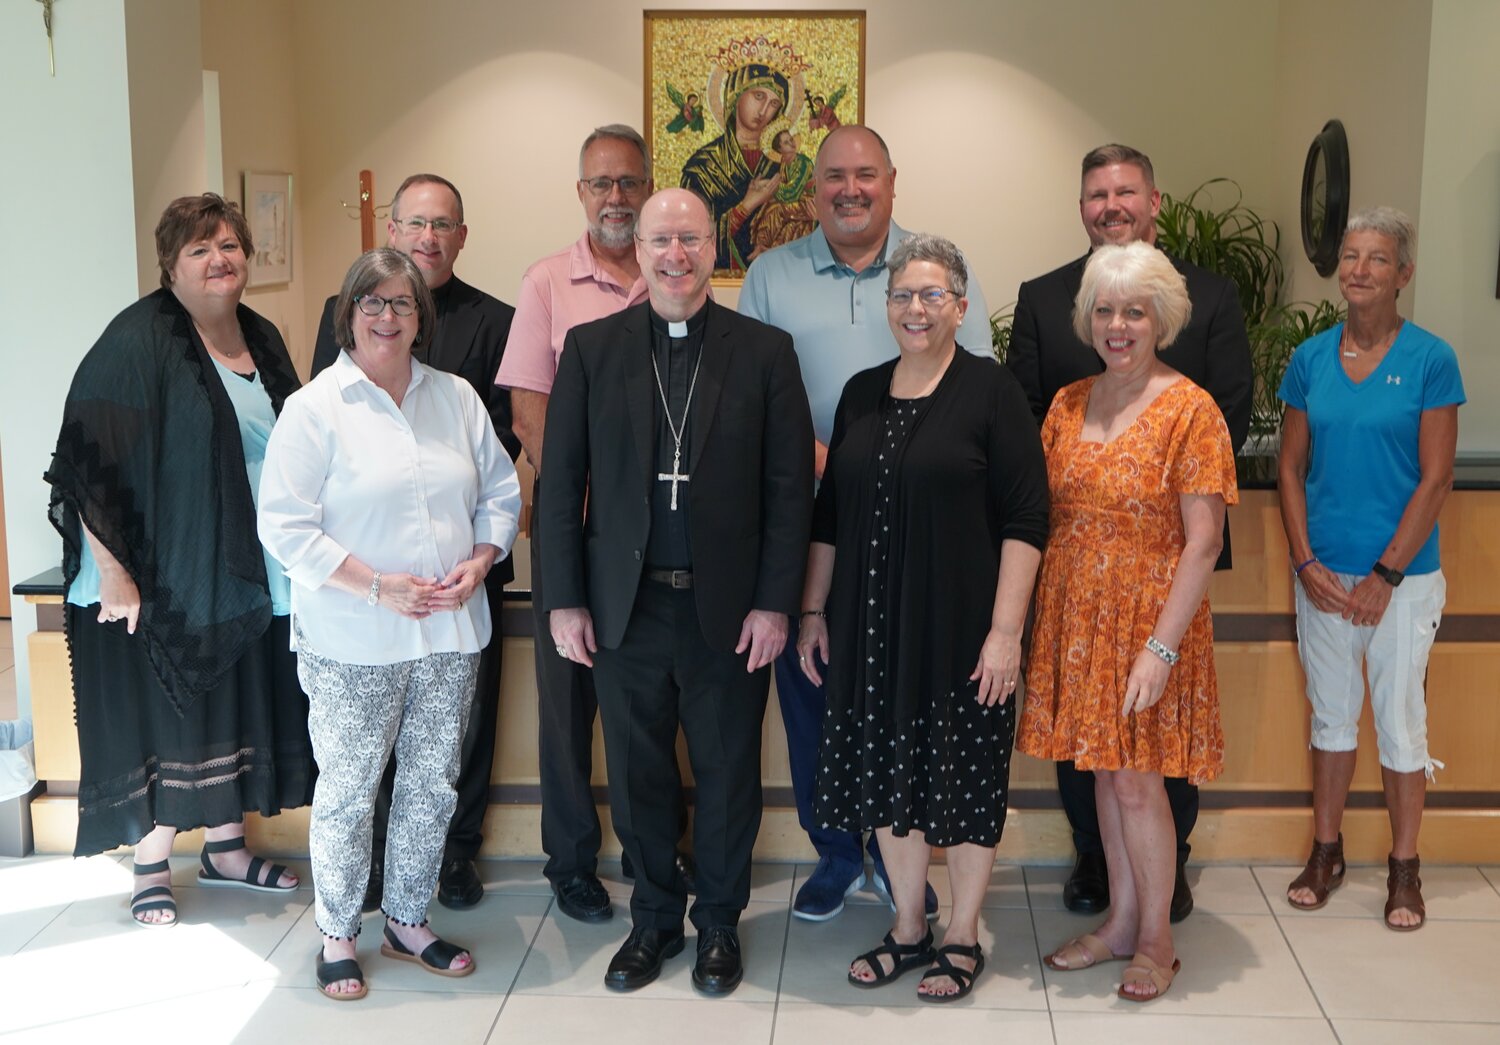 The following members of the Diocesan Stewardship Council attended the council’s inaugural meeting on Aug. 23: (front row) Anne Hackman, Bishop W. Shawn McKnight, Kyle Clark, Theresa Krebs, (back row) Trish Lutz, Father Jason Doke, Kent Monnig, Mike Aulbur, Father Stephen Jones, and Mary Beth Strassner.